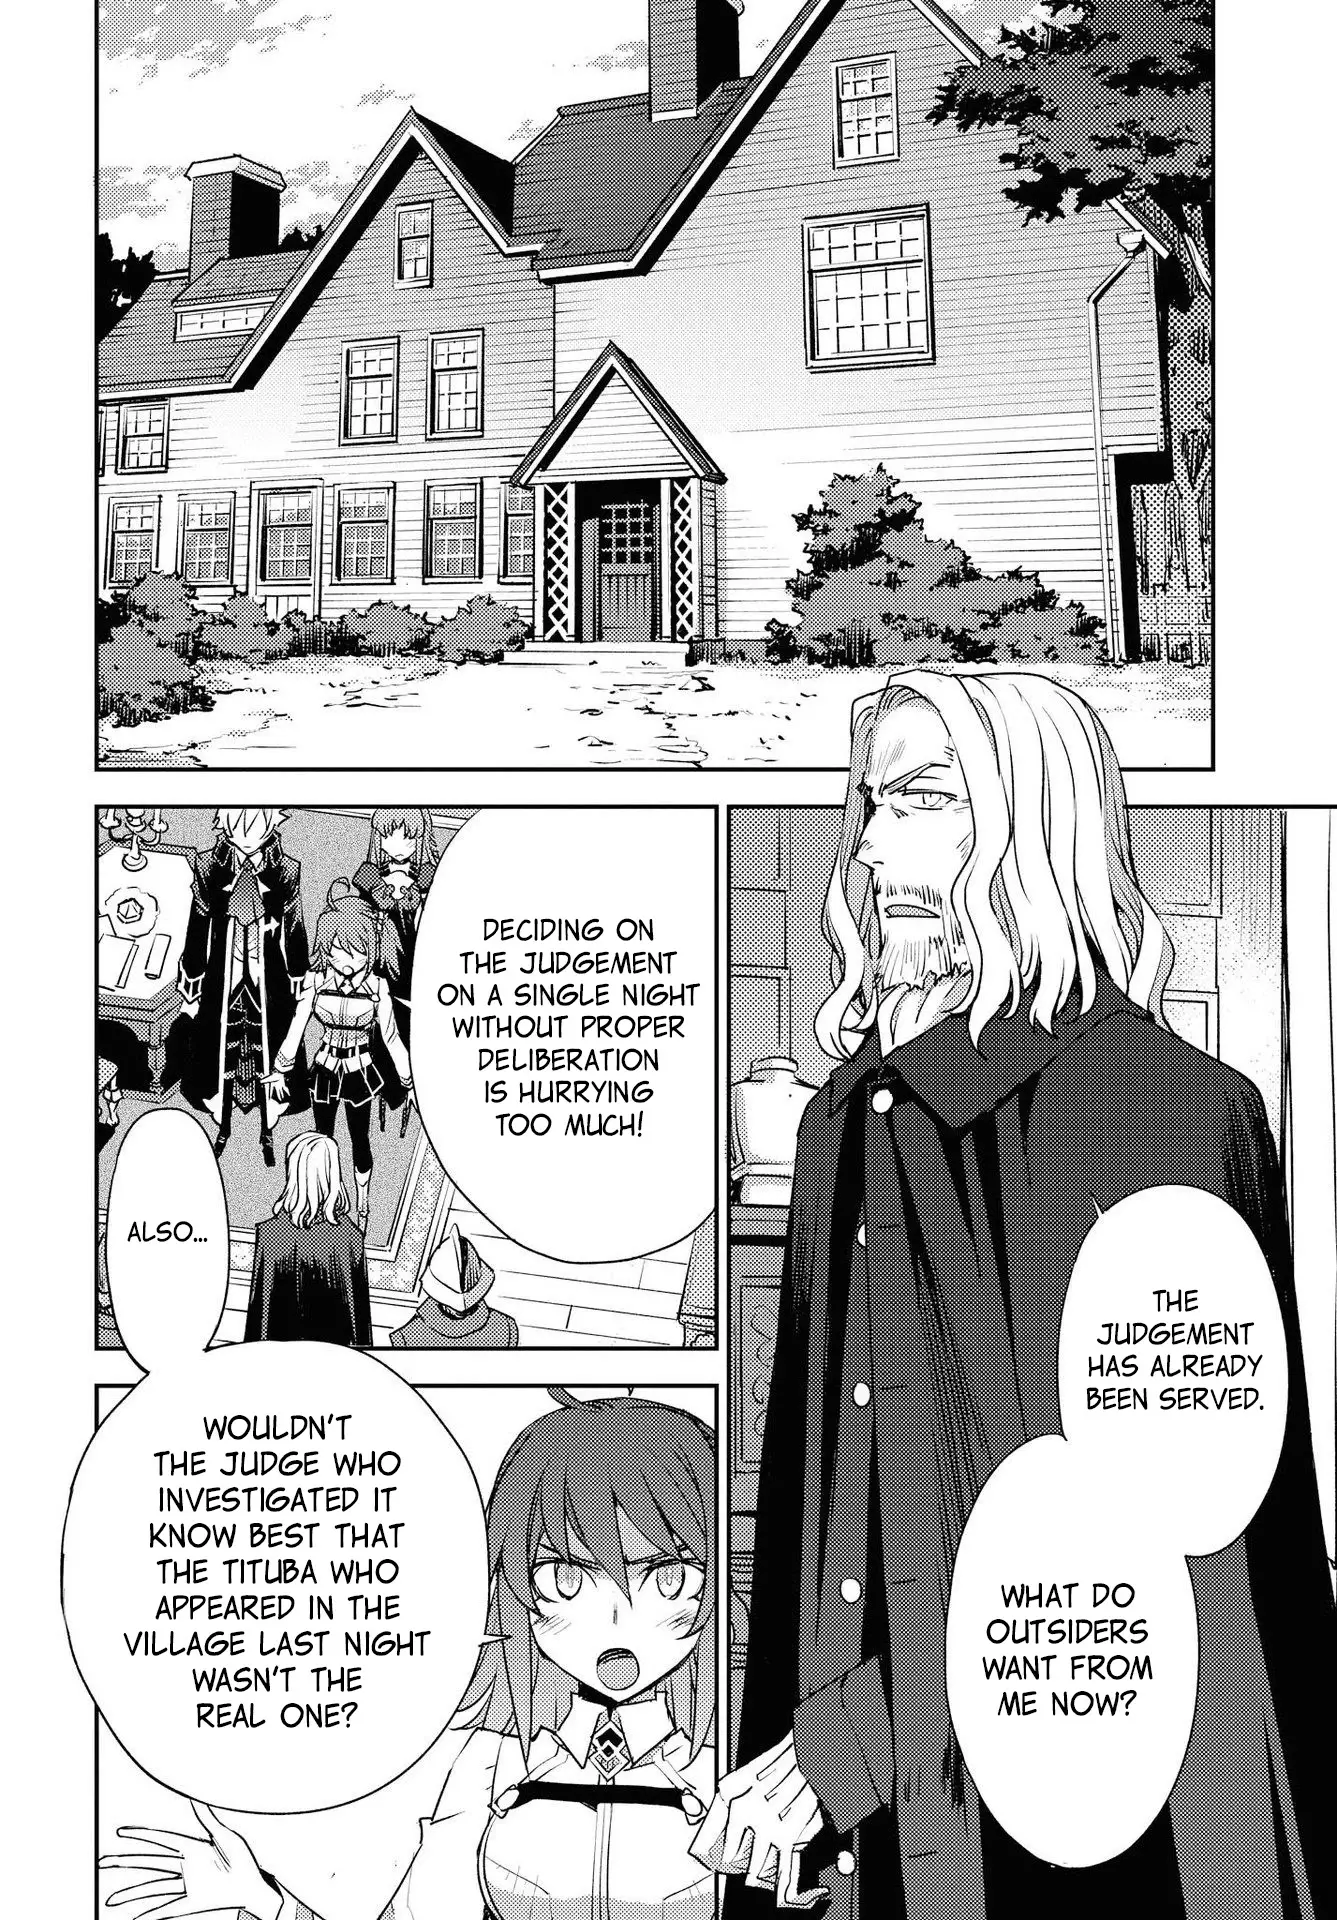 Fate/grand Order: Epic Of Remnant - Subspecies Singularity Iv: Taboo Advent Salem: Salem Of Heresy - 12 page 10